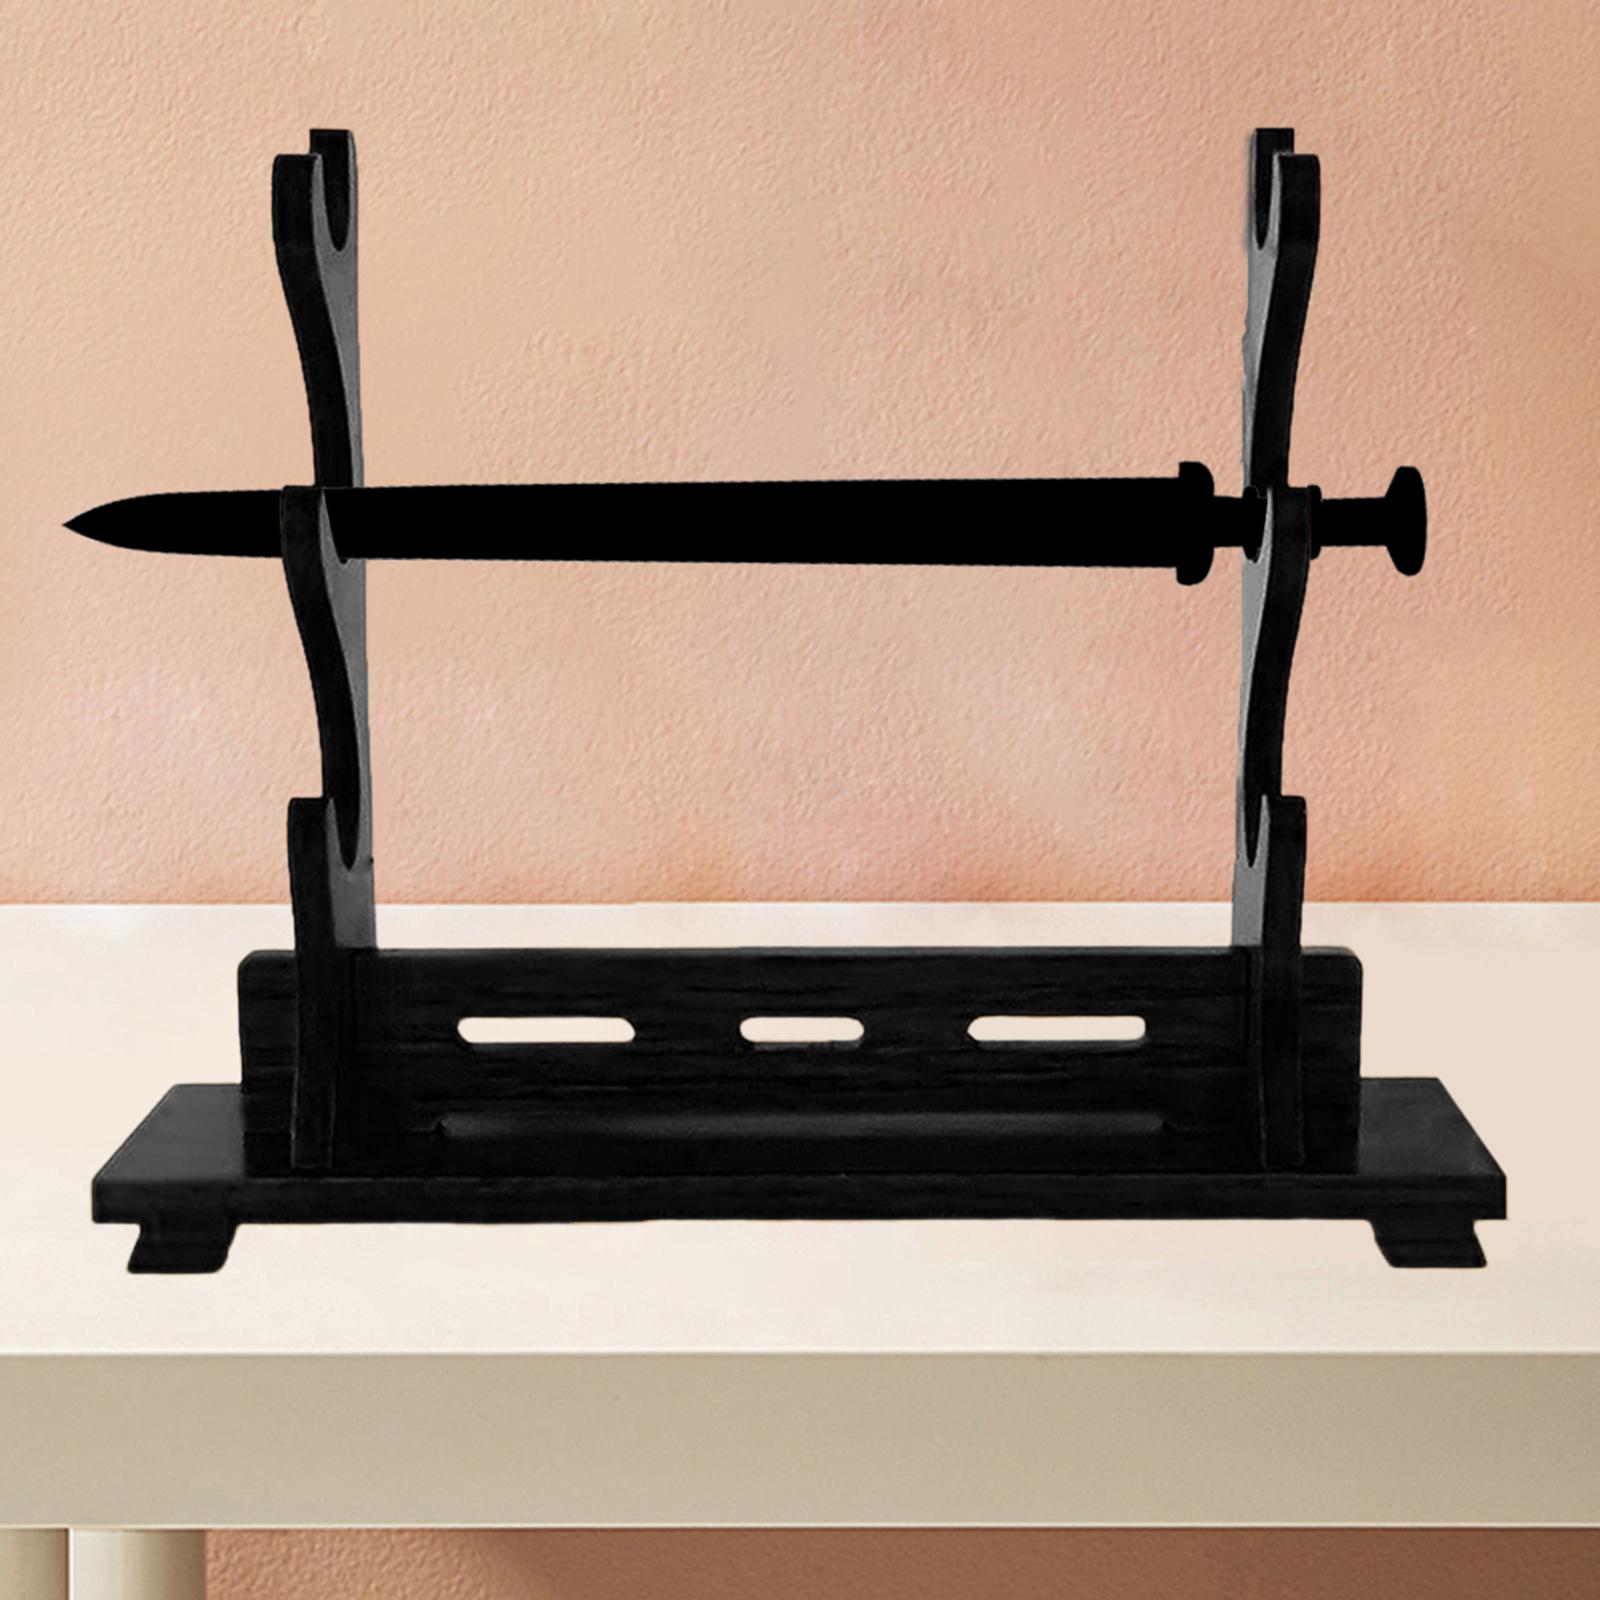 Samurai Accessories Stand Wood Holder Rack Black Placing and Storing Durable 3 Layers